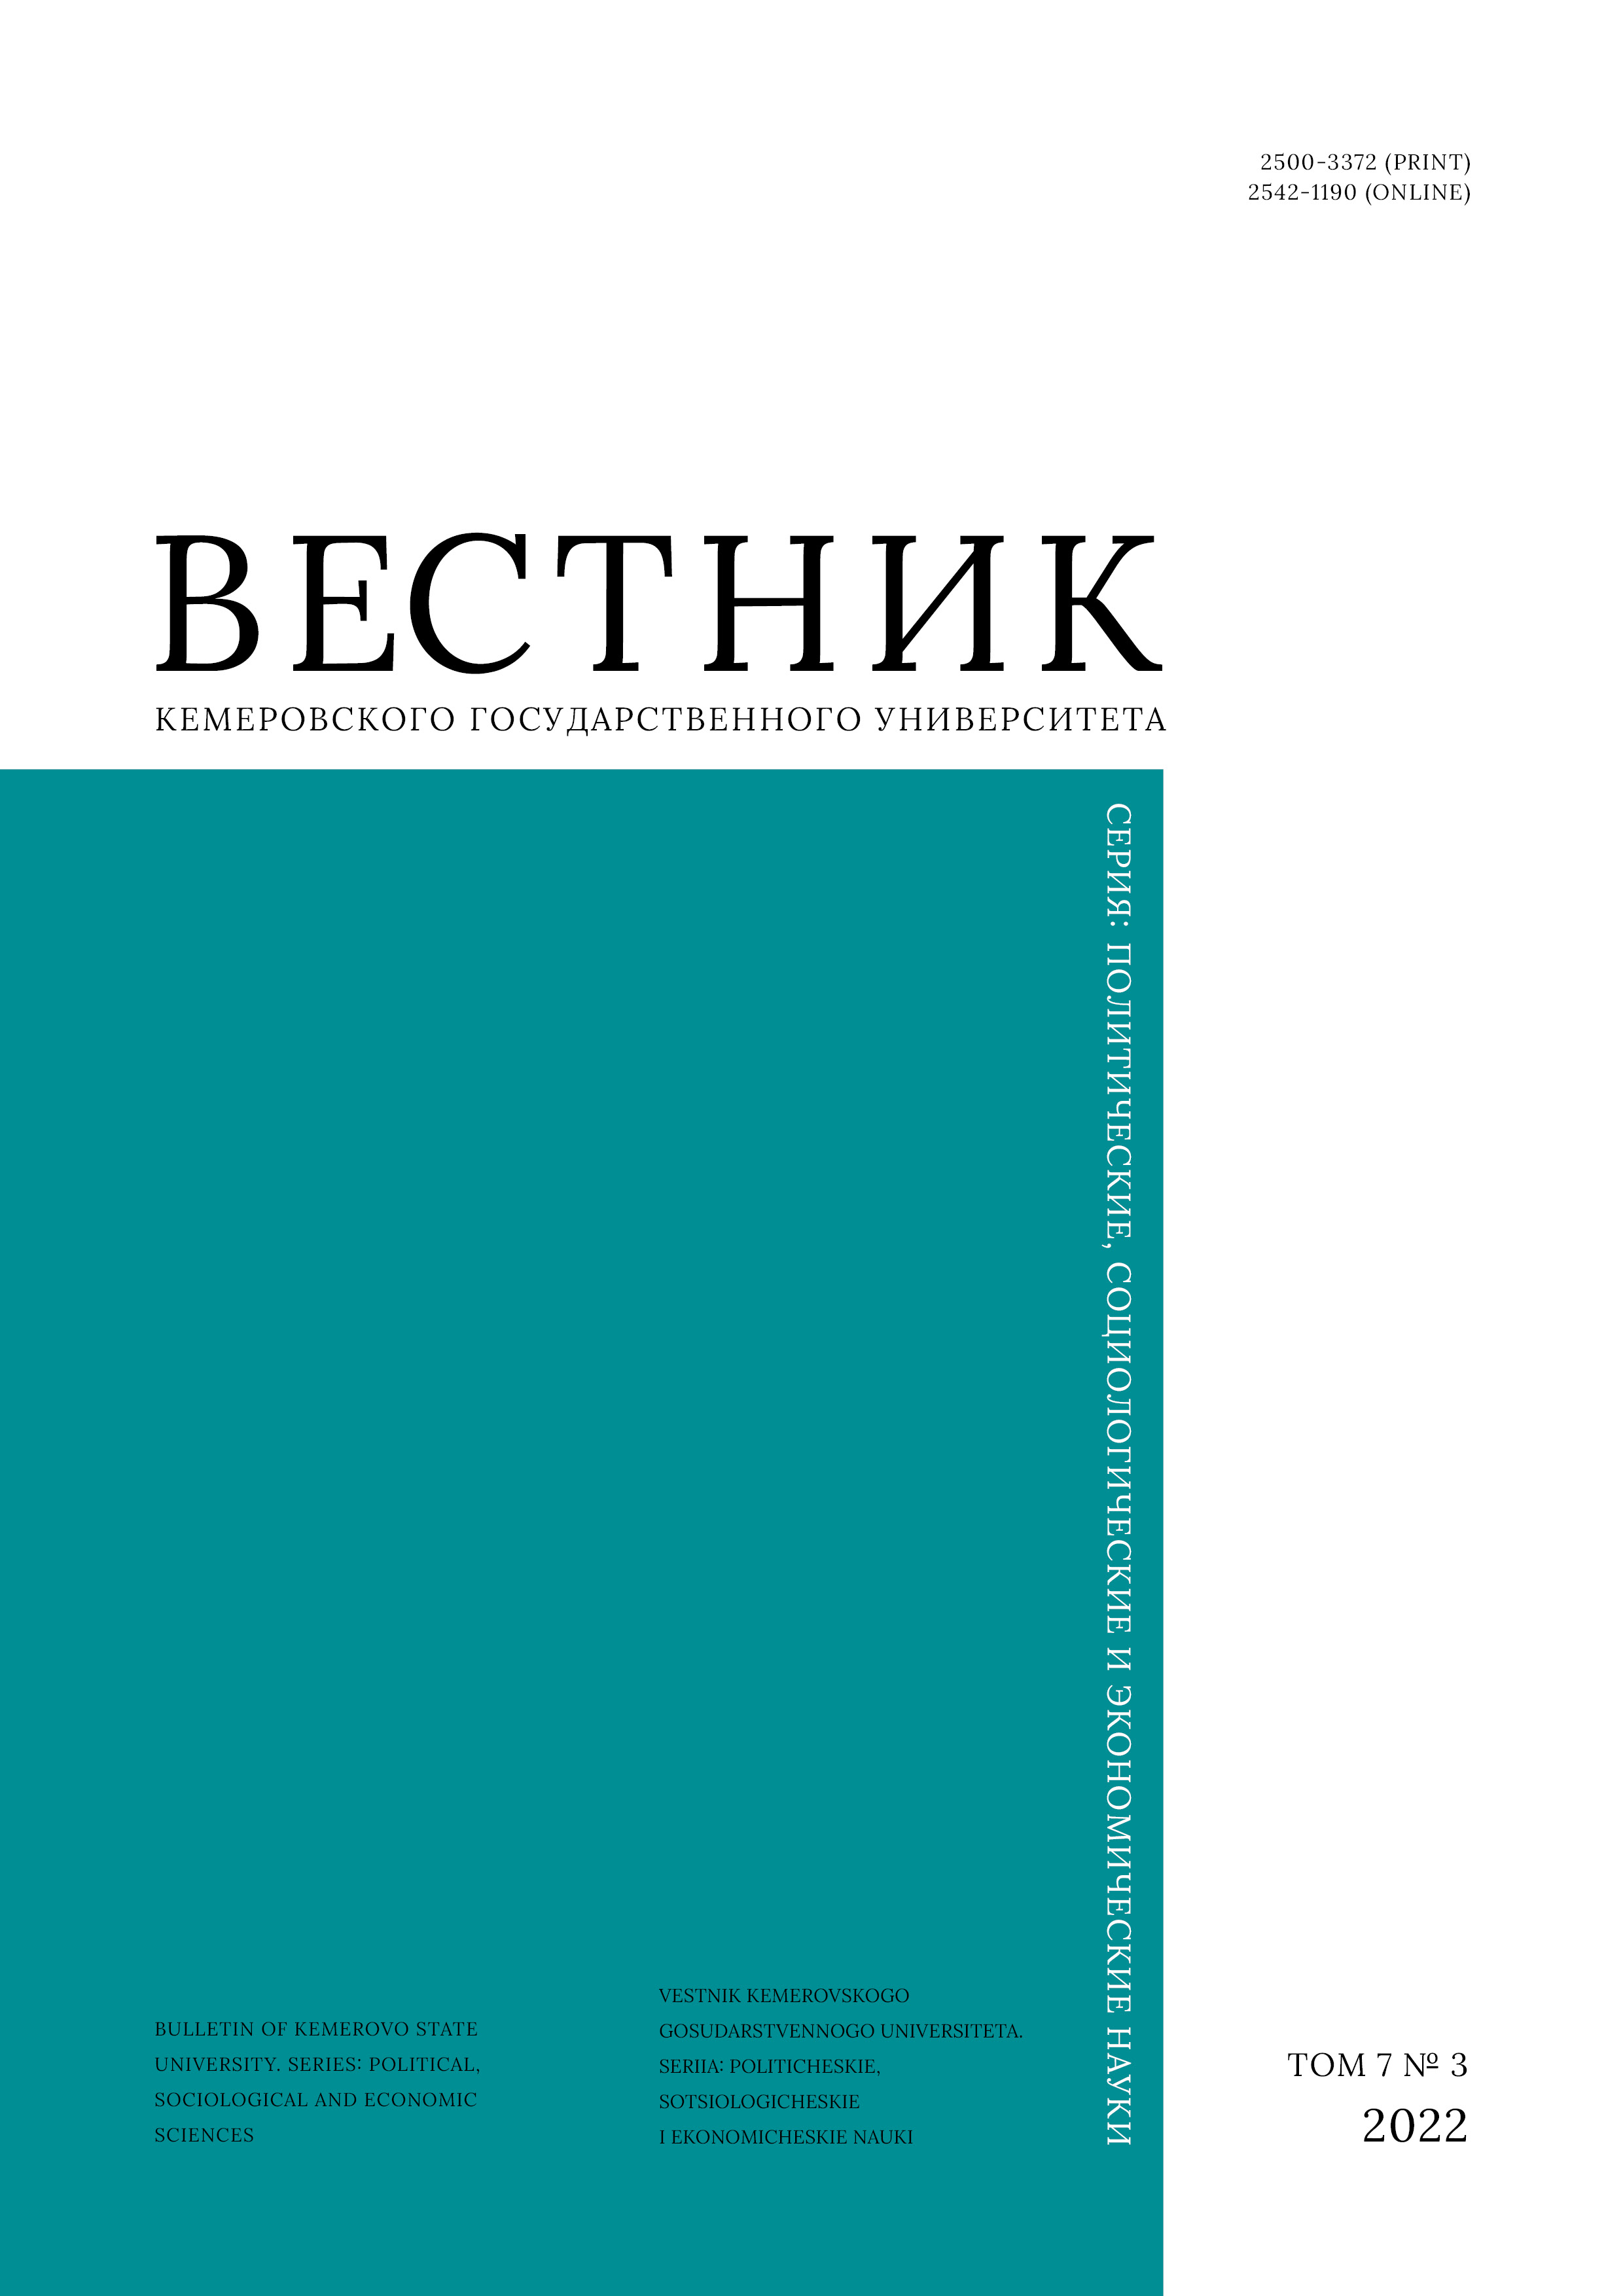                         Formation and Distribution of Financial Resources  of a Higher Educational Institution in the Russian Federation: Improving the Methodological Support
            